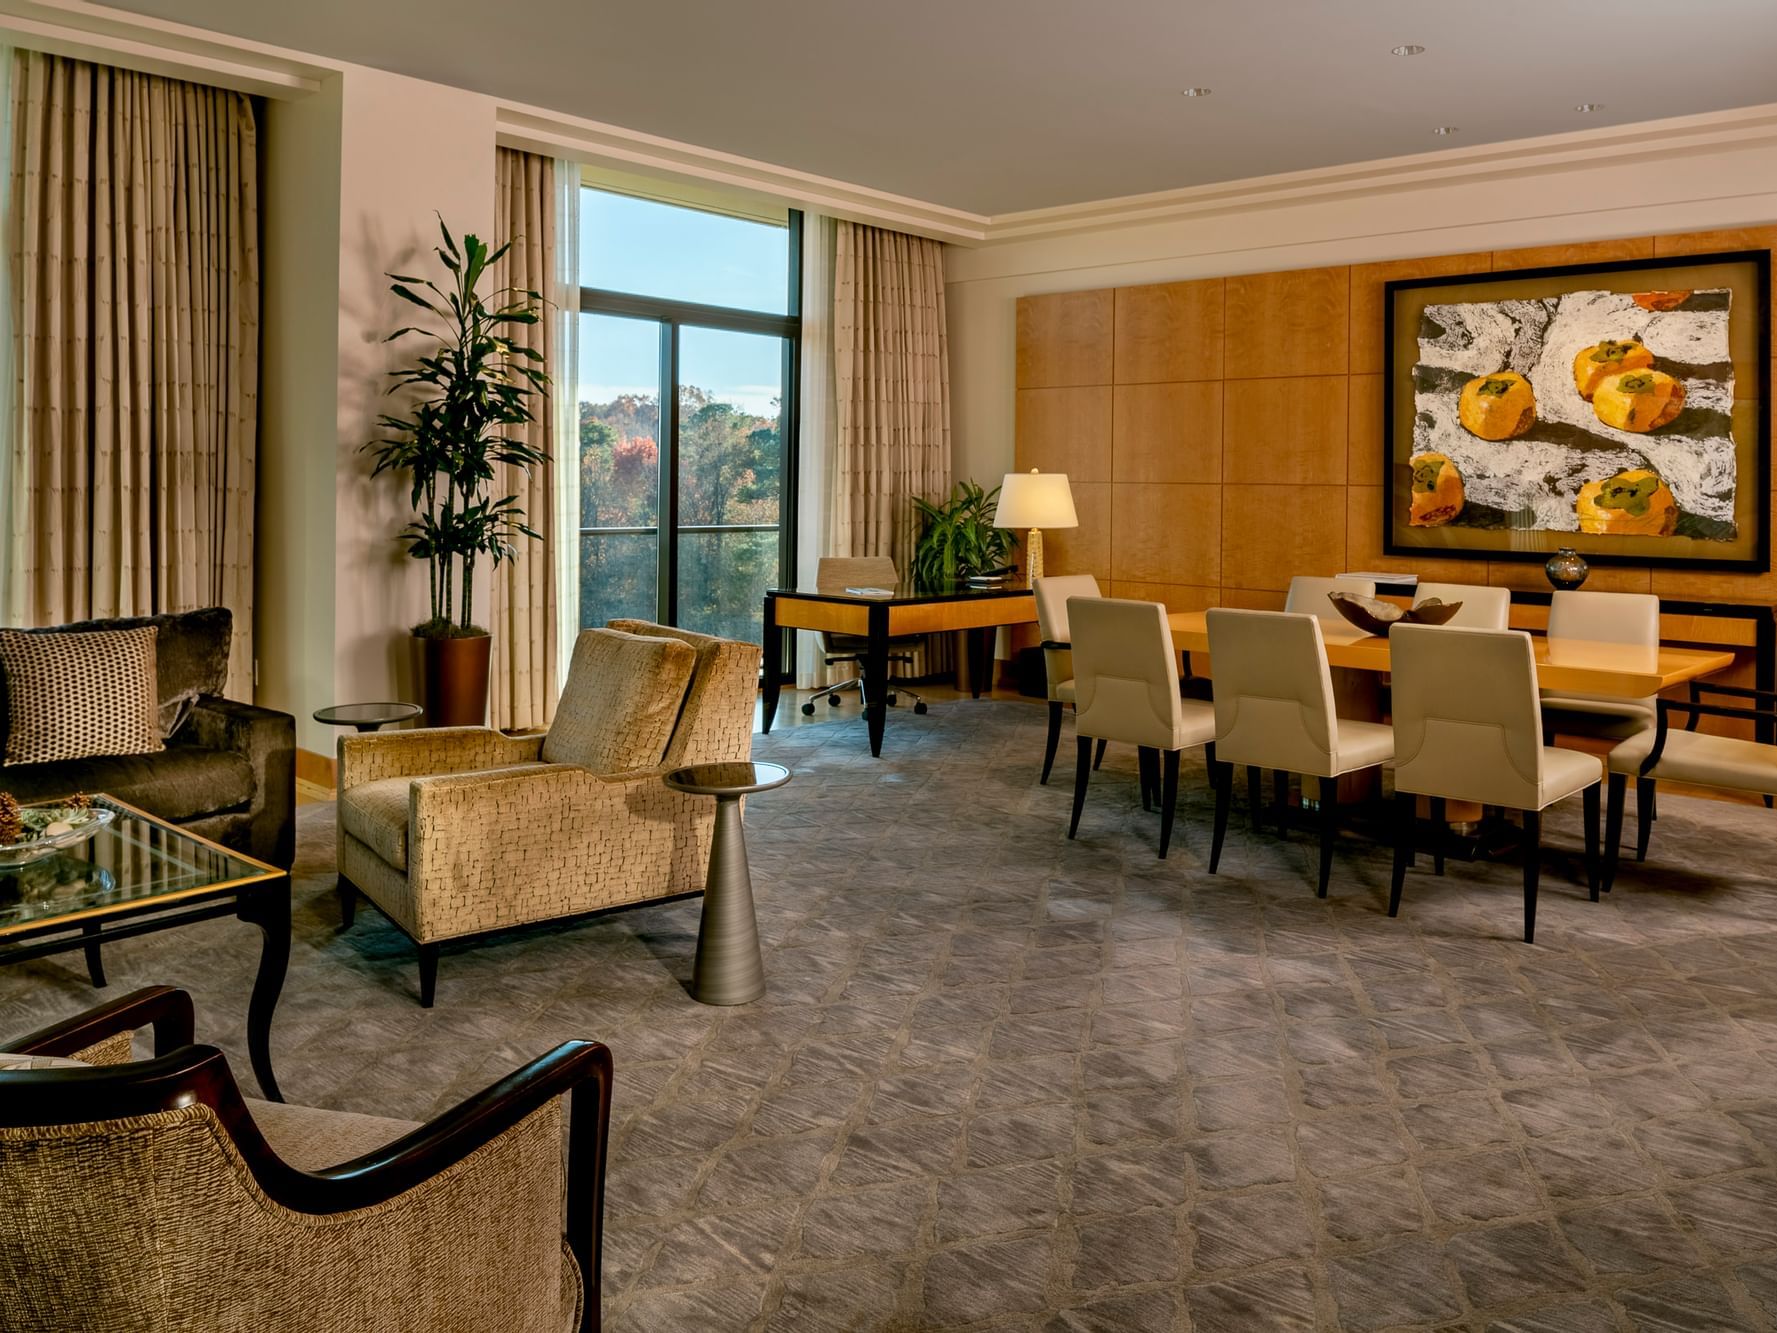 Luxury Presidential Suite with original artwork, custom carpets & furniture in exotic woods at The Umstead Hotel and Spa